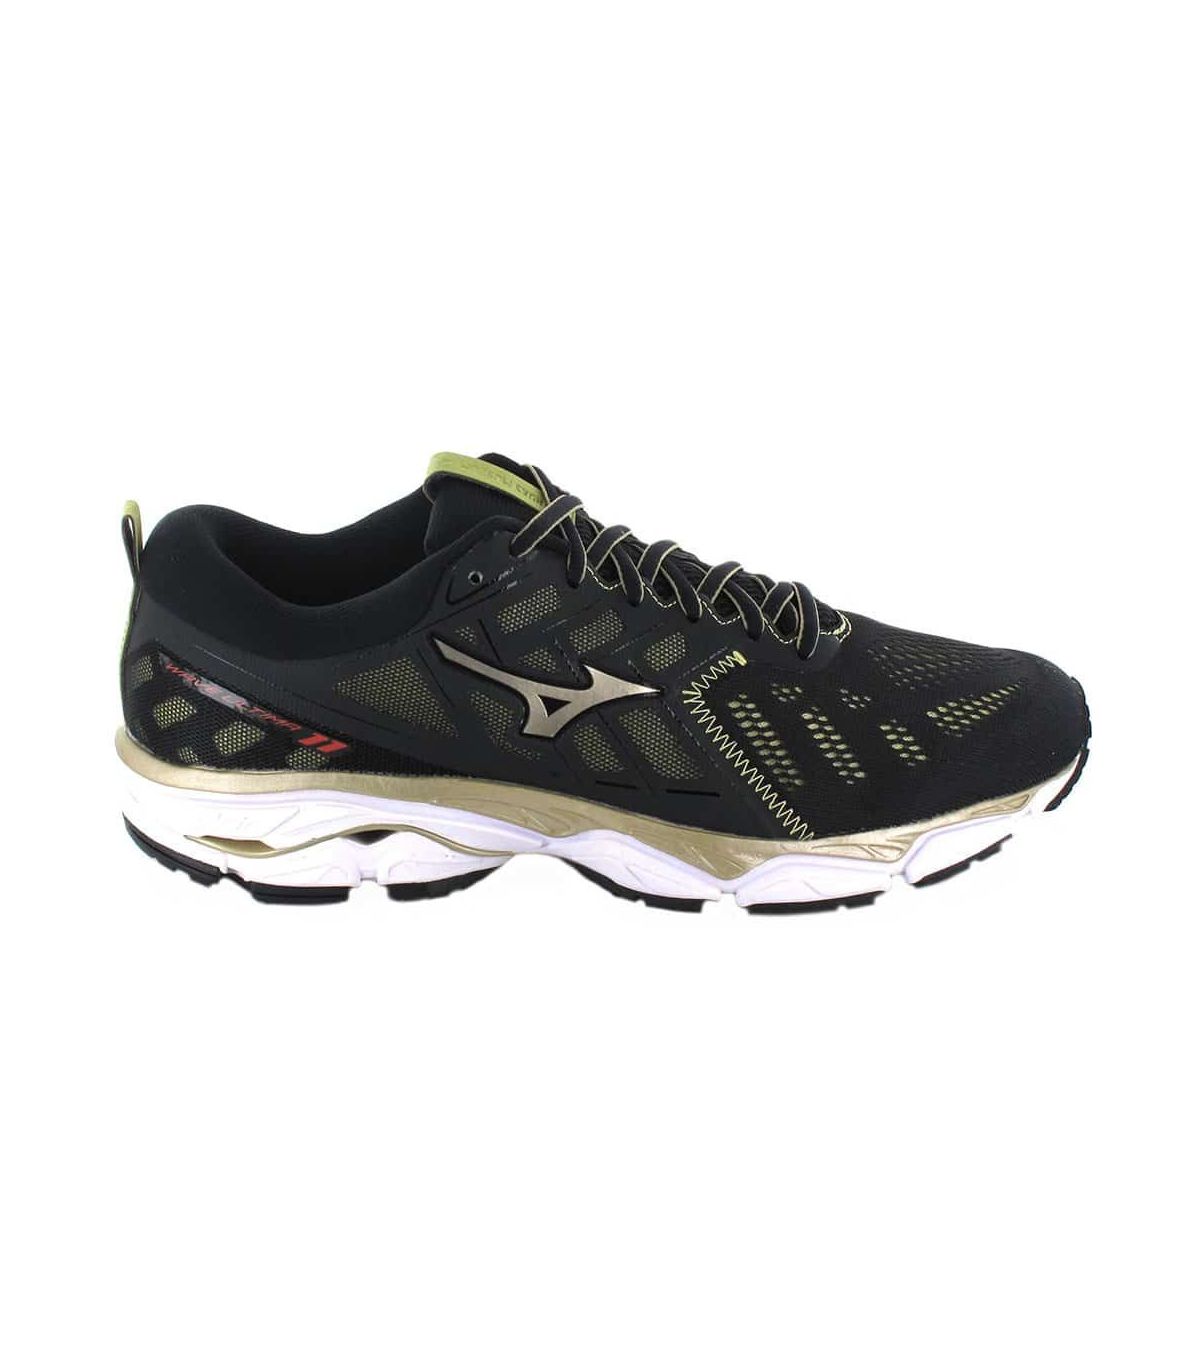 Mizuno Wave Ultima 11 Mens Running Shoes Trainers Black Amsterdam LimitedEdition